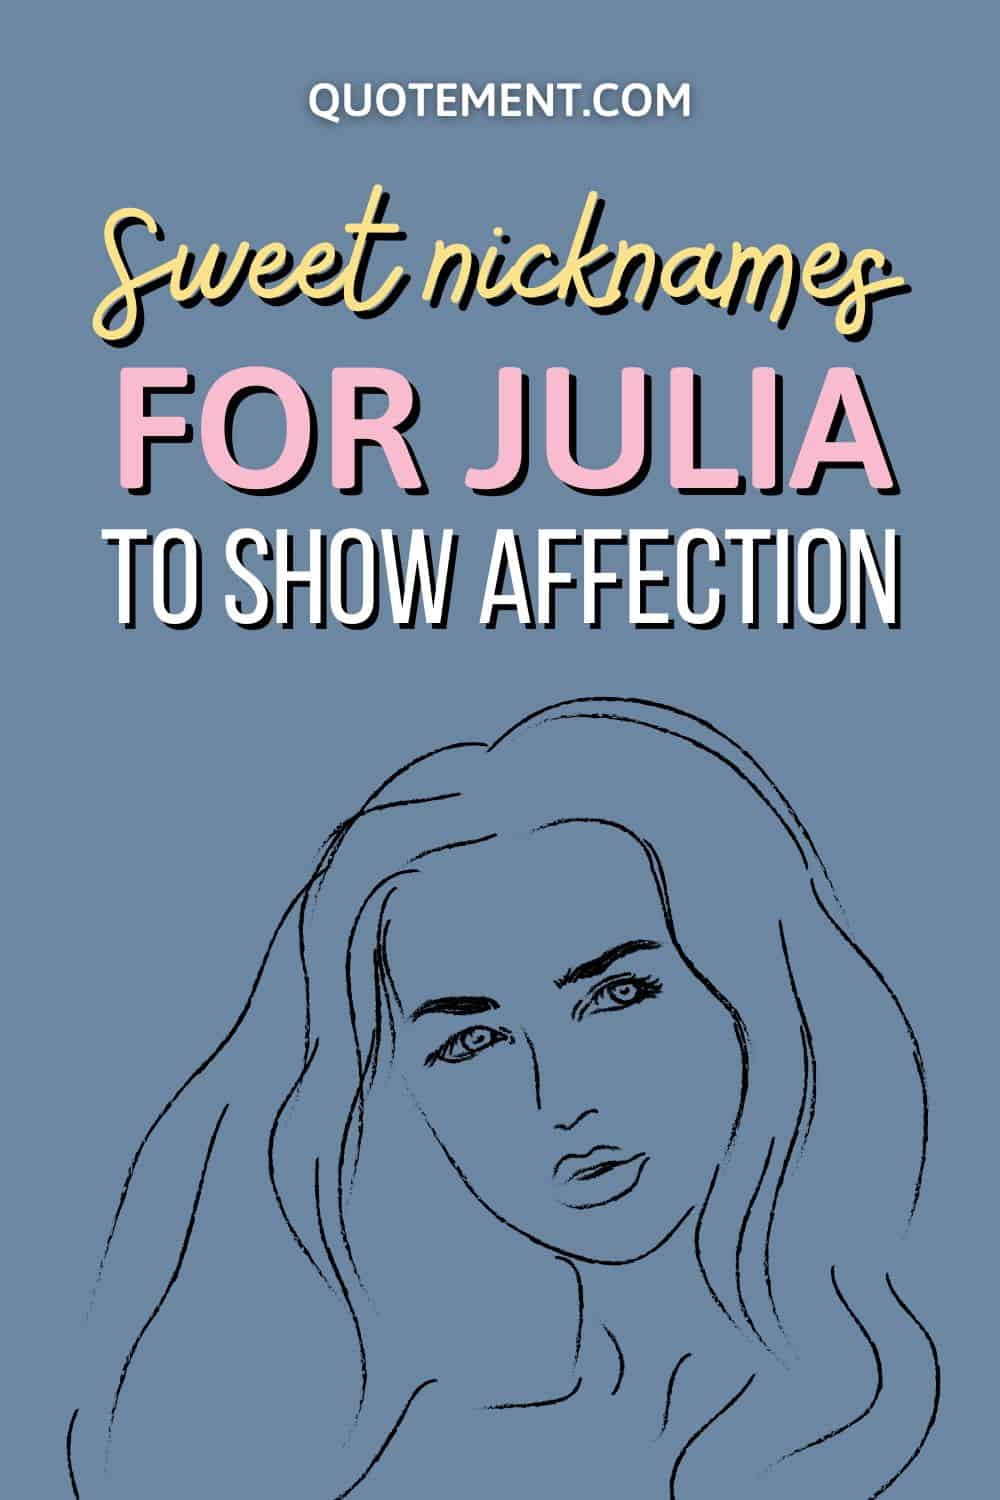 130 Absolute Best Nicknames For Julia To Show Affection